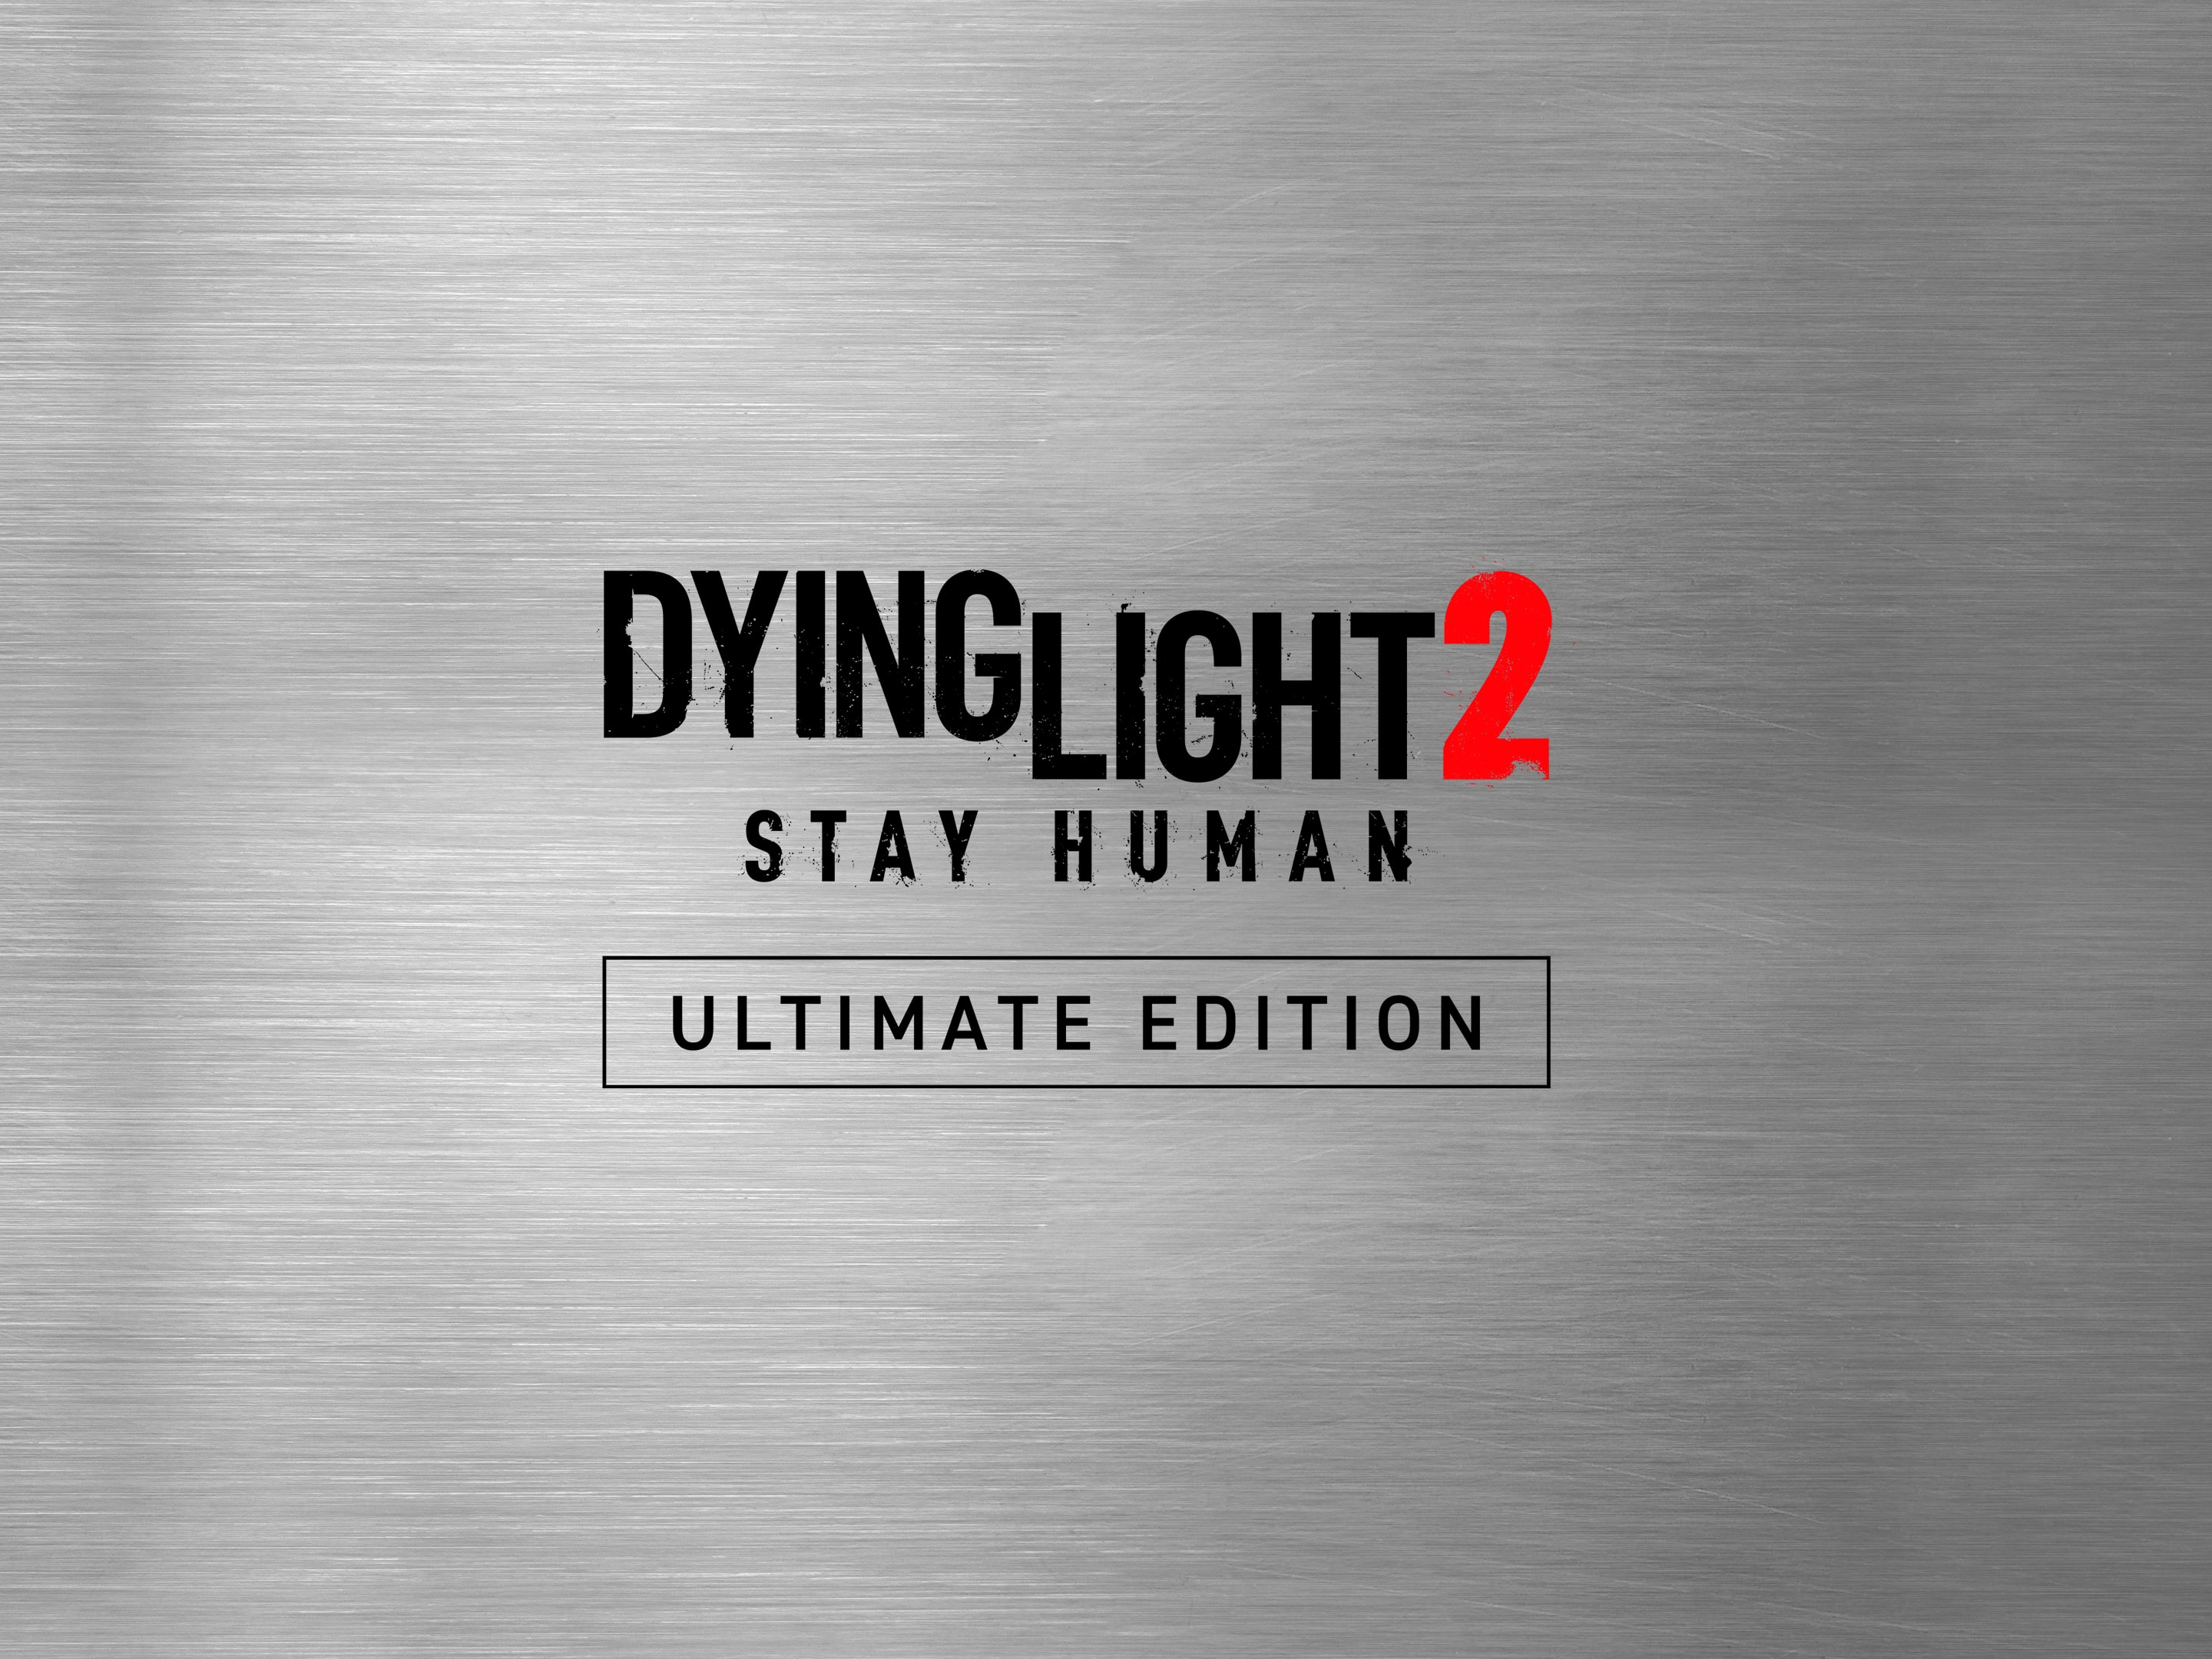 Dying Light 2 (PS4) cheap - Price of $17.80